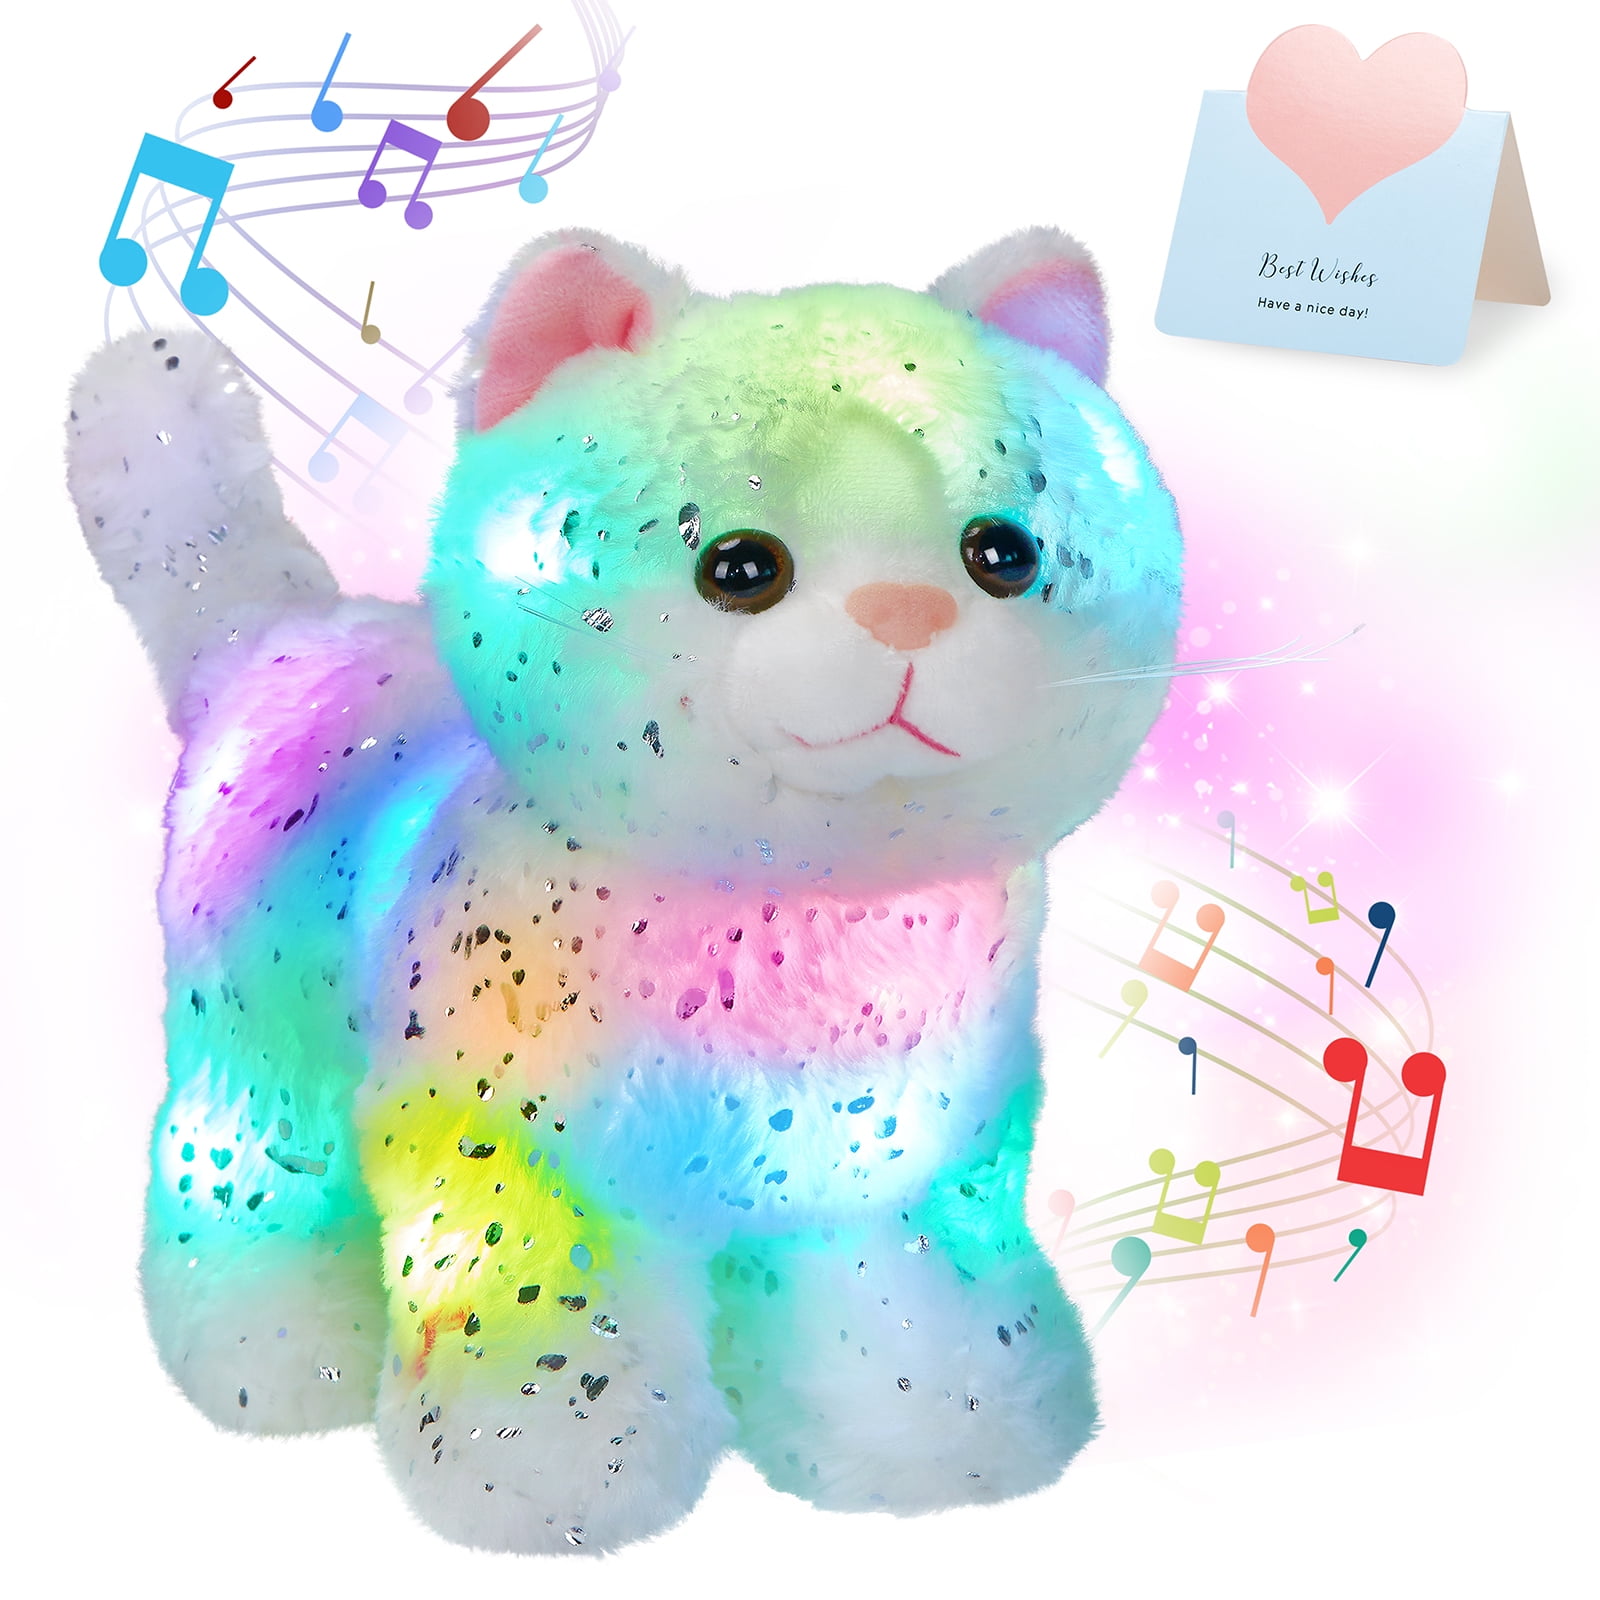 9'' SpecialYou Light up Stuffed Kitty Soft Plush Cat Toy LED Stuffed Animals with Colorful Night Lights Glowing Gift for Kids Boy Girl on Birthday Holiday 